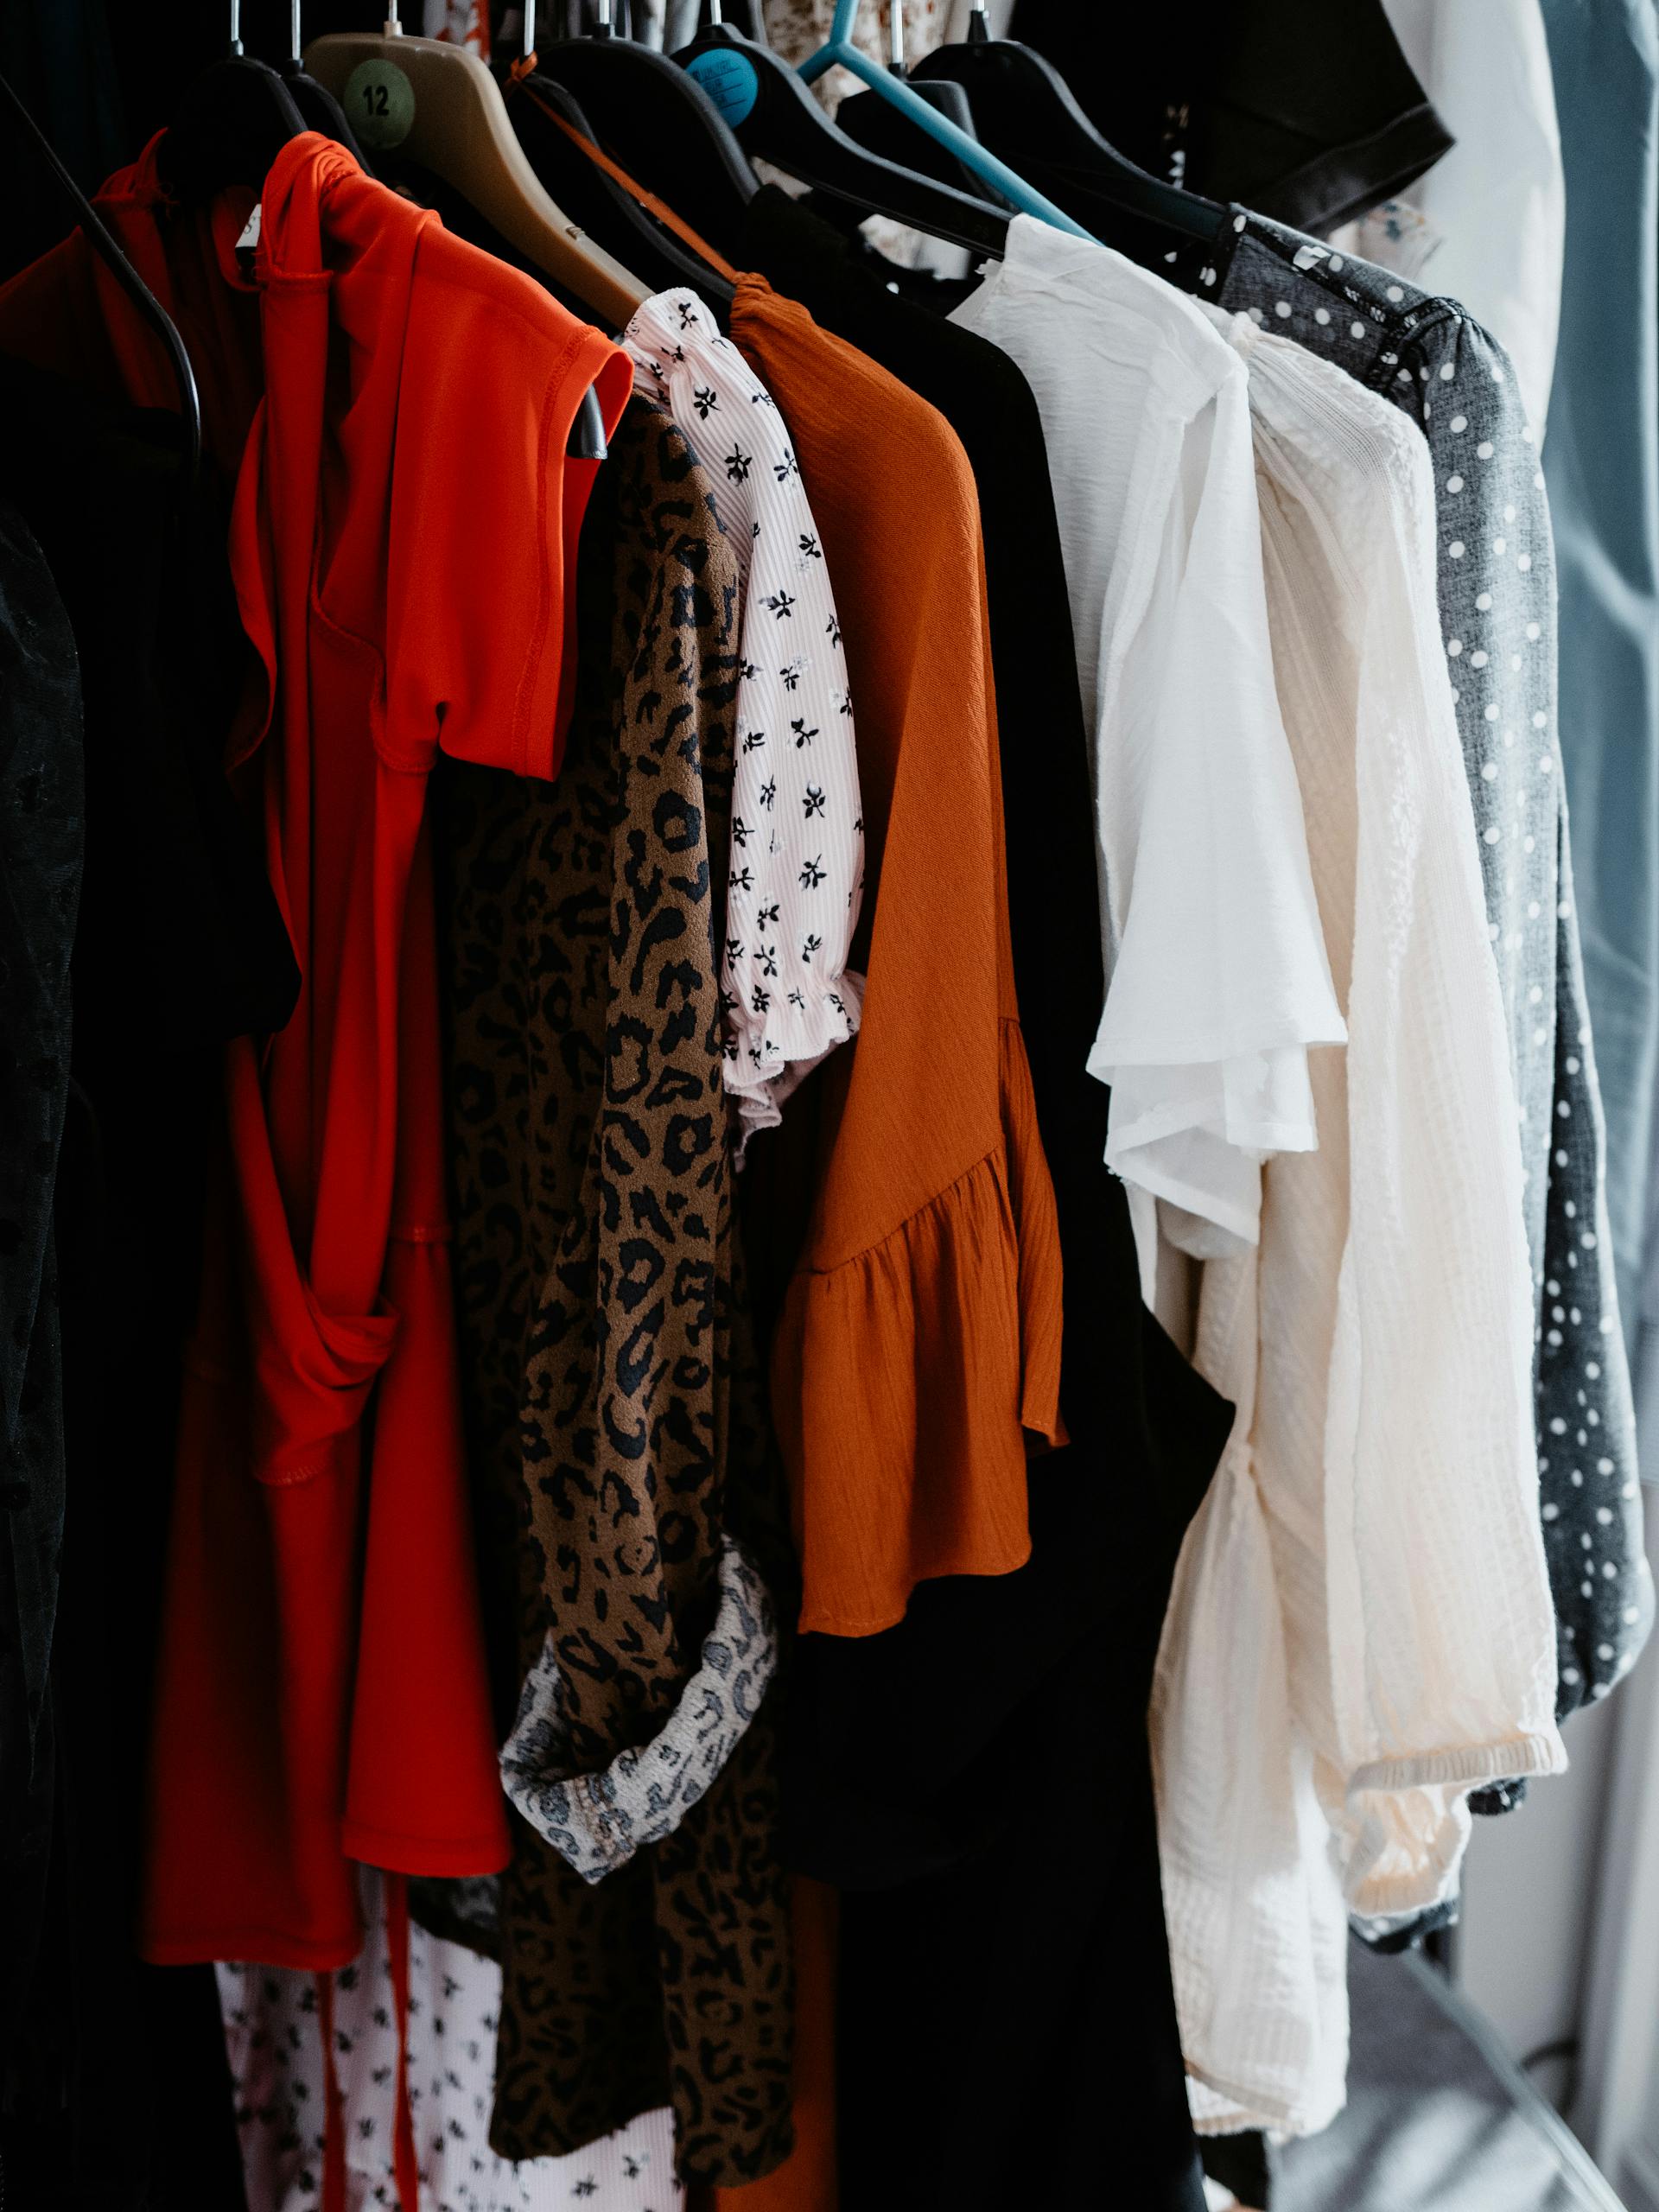 Clothes on a rack | Source: Pexels